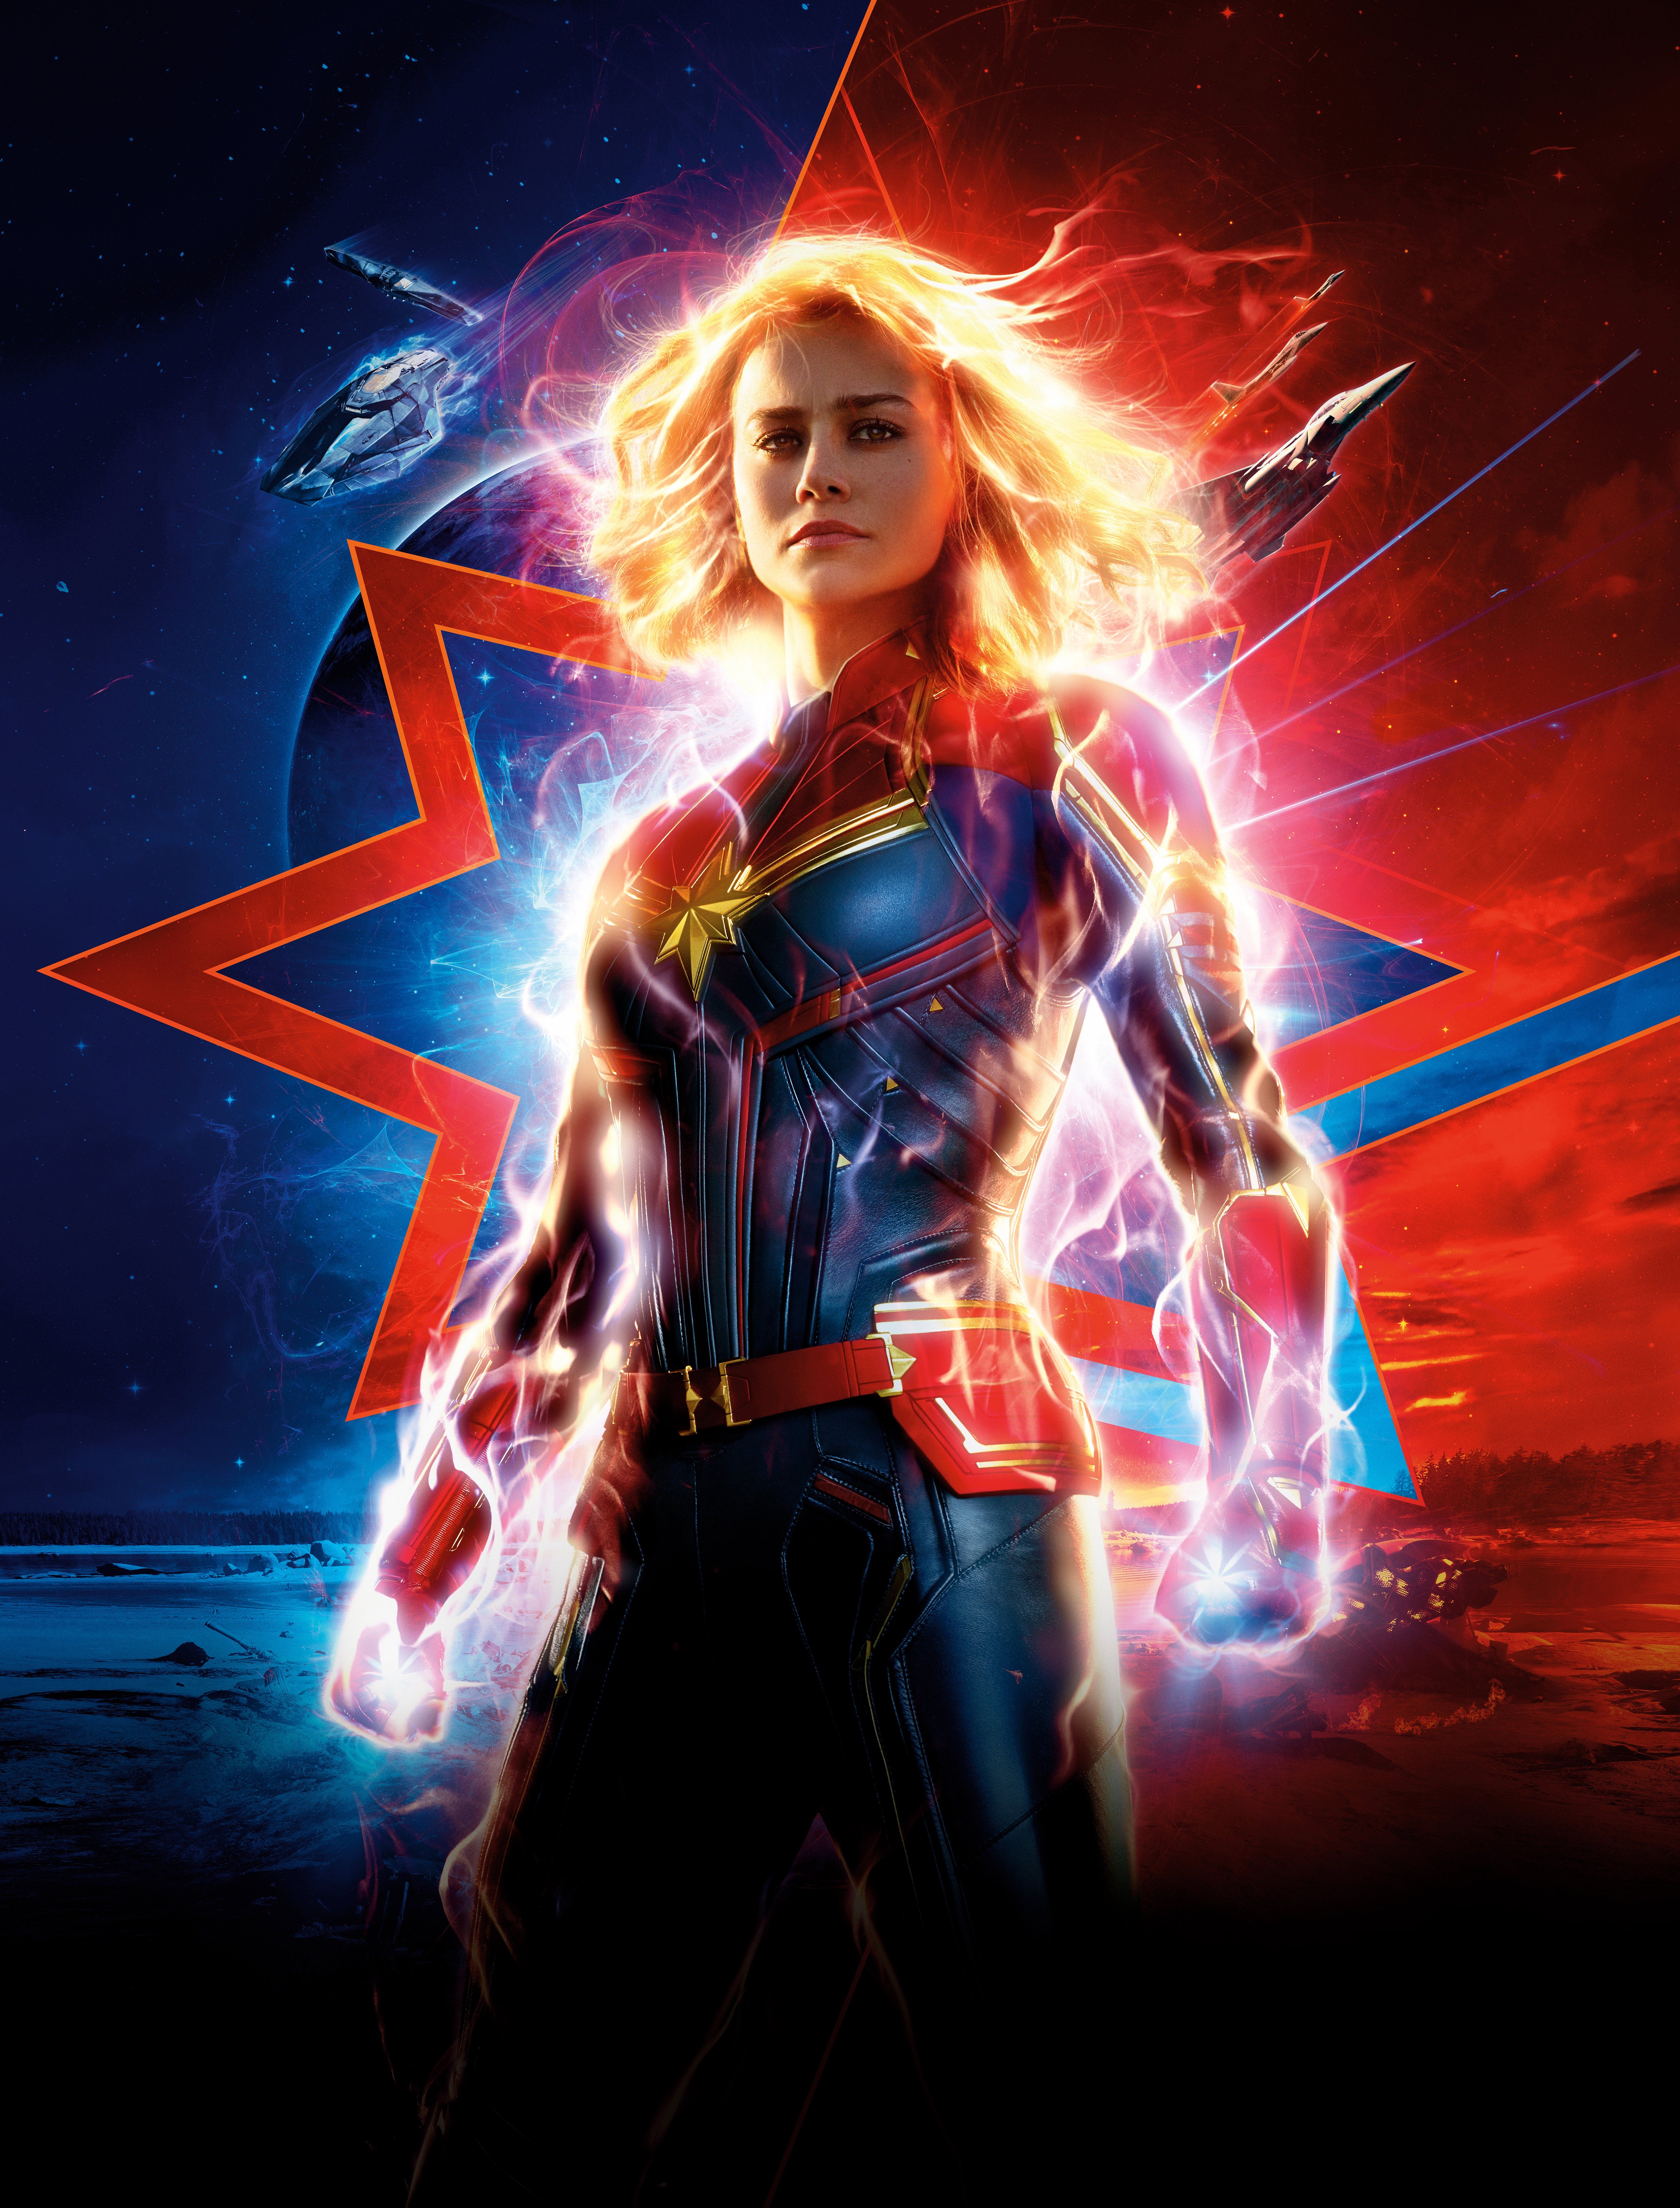 Brie Larson in ‘Captain Marvel’. The star sees her role as an opportunity to empower women.